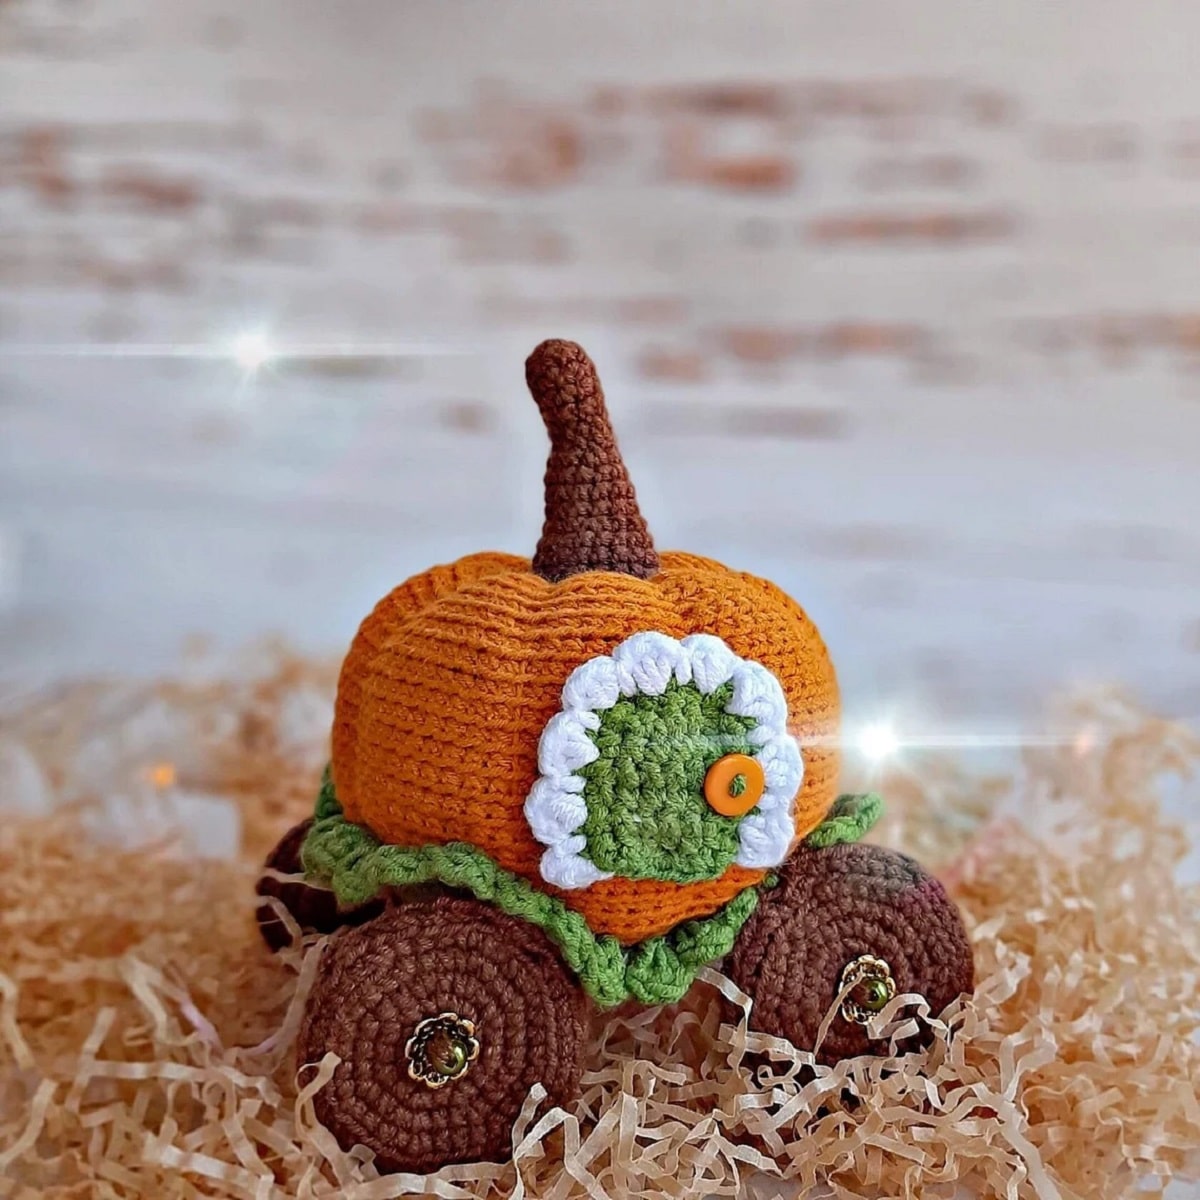 An orange crochet pumpkin carriage with a green door and brown wheels on the bottom on orange shredded paper.